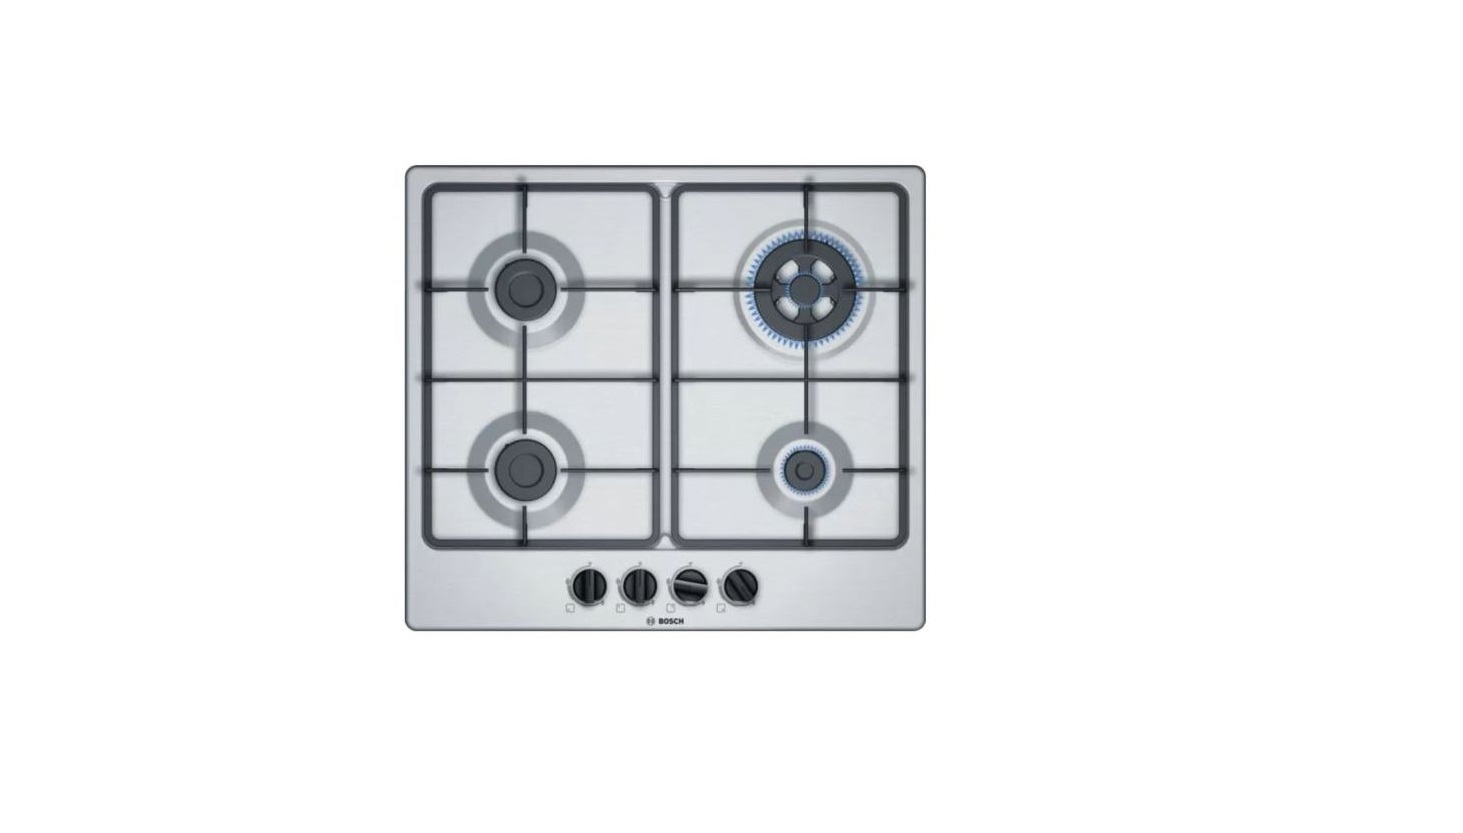 BOSCH PGH6B.O 60cm Series 4 Induction Gas Hob Instruction Manual - Featured image